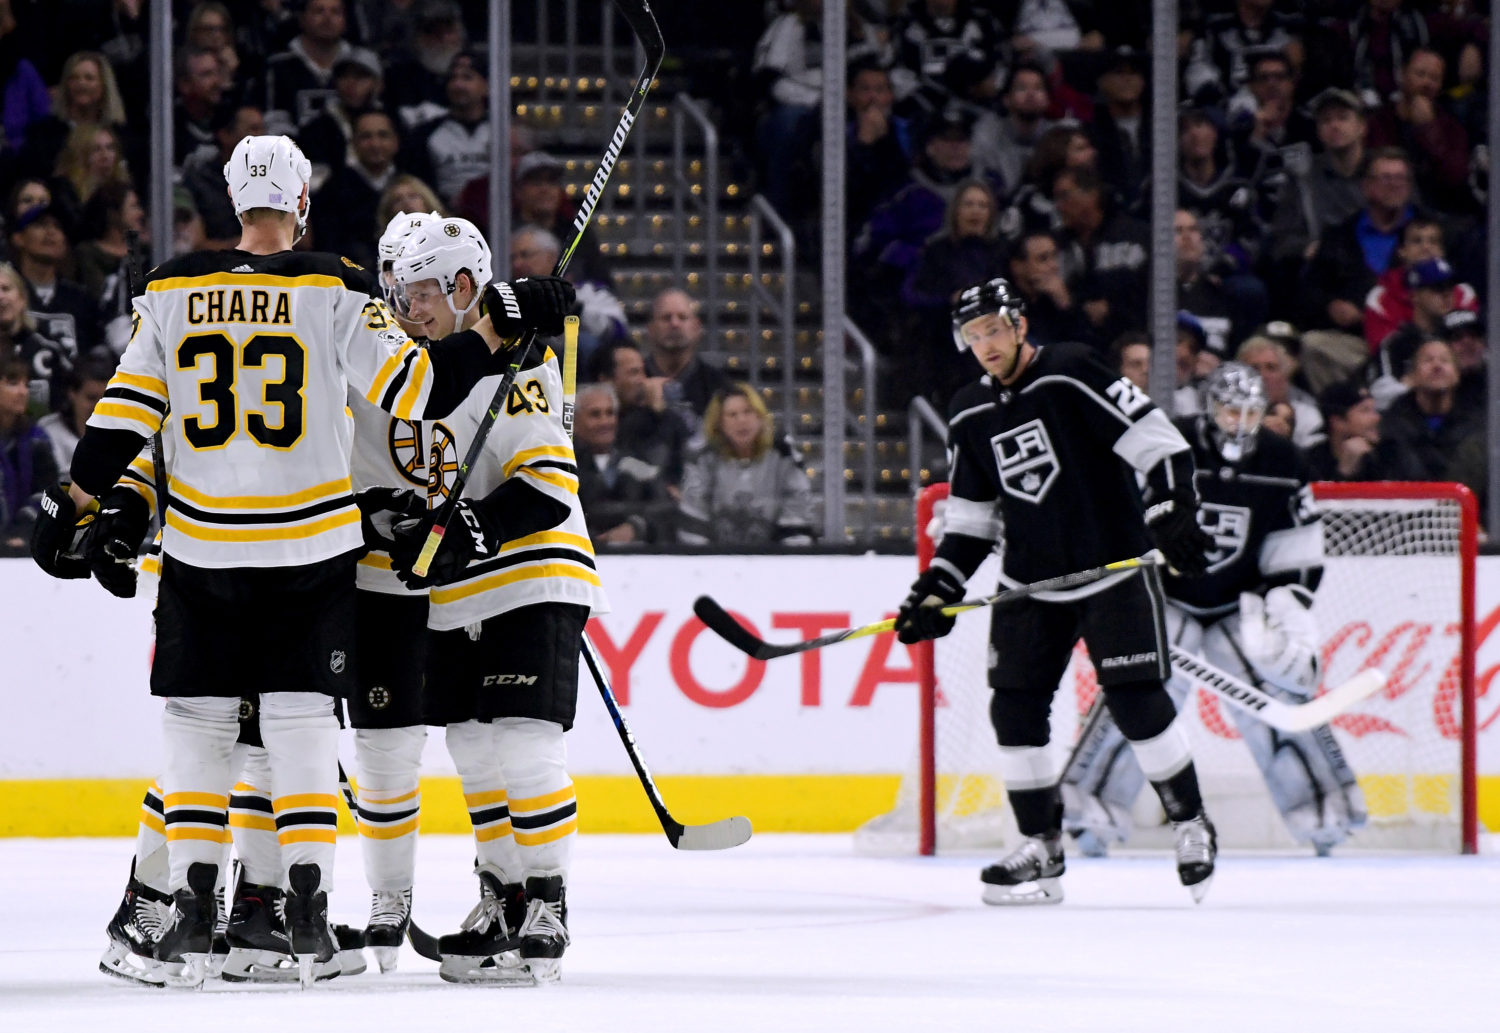 Los Angeles Kings star Zdeno Chara? Yes, it almost happened - The